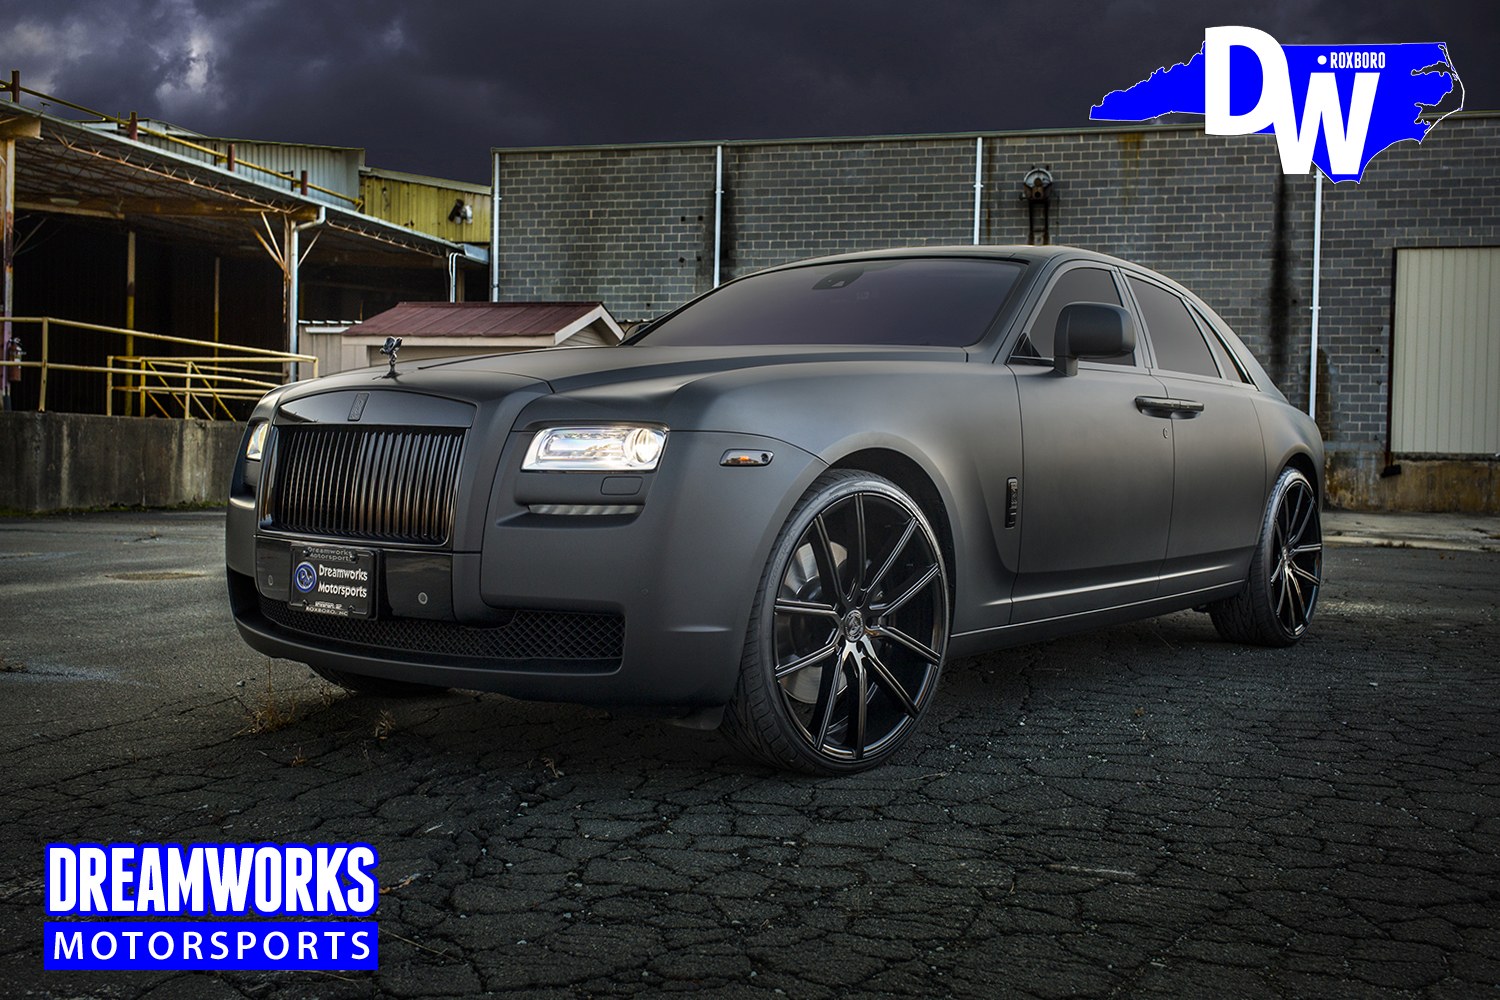 Used 2012 Rolls Royce Ghost CUSTOM WHEELS CERTIFIED for Sale in Guelph  Ontario  Carpagesca